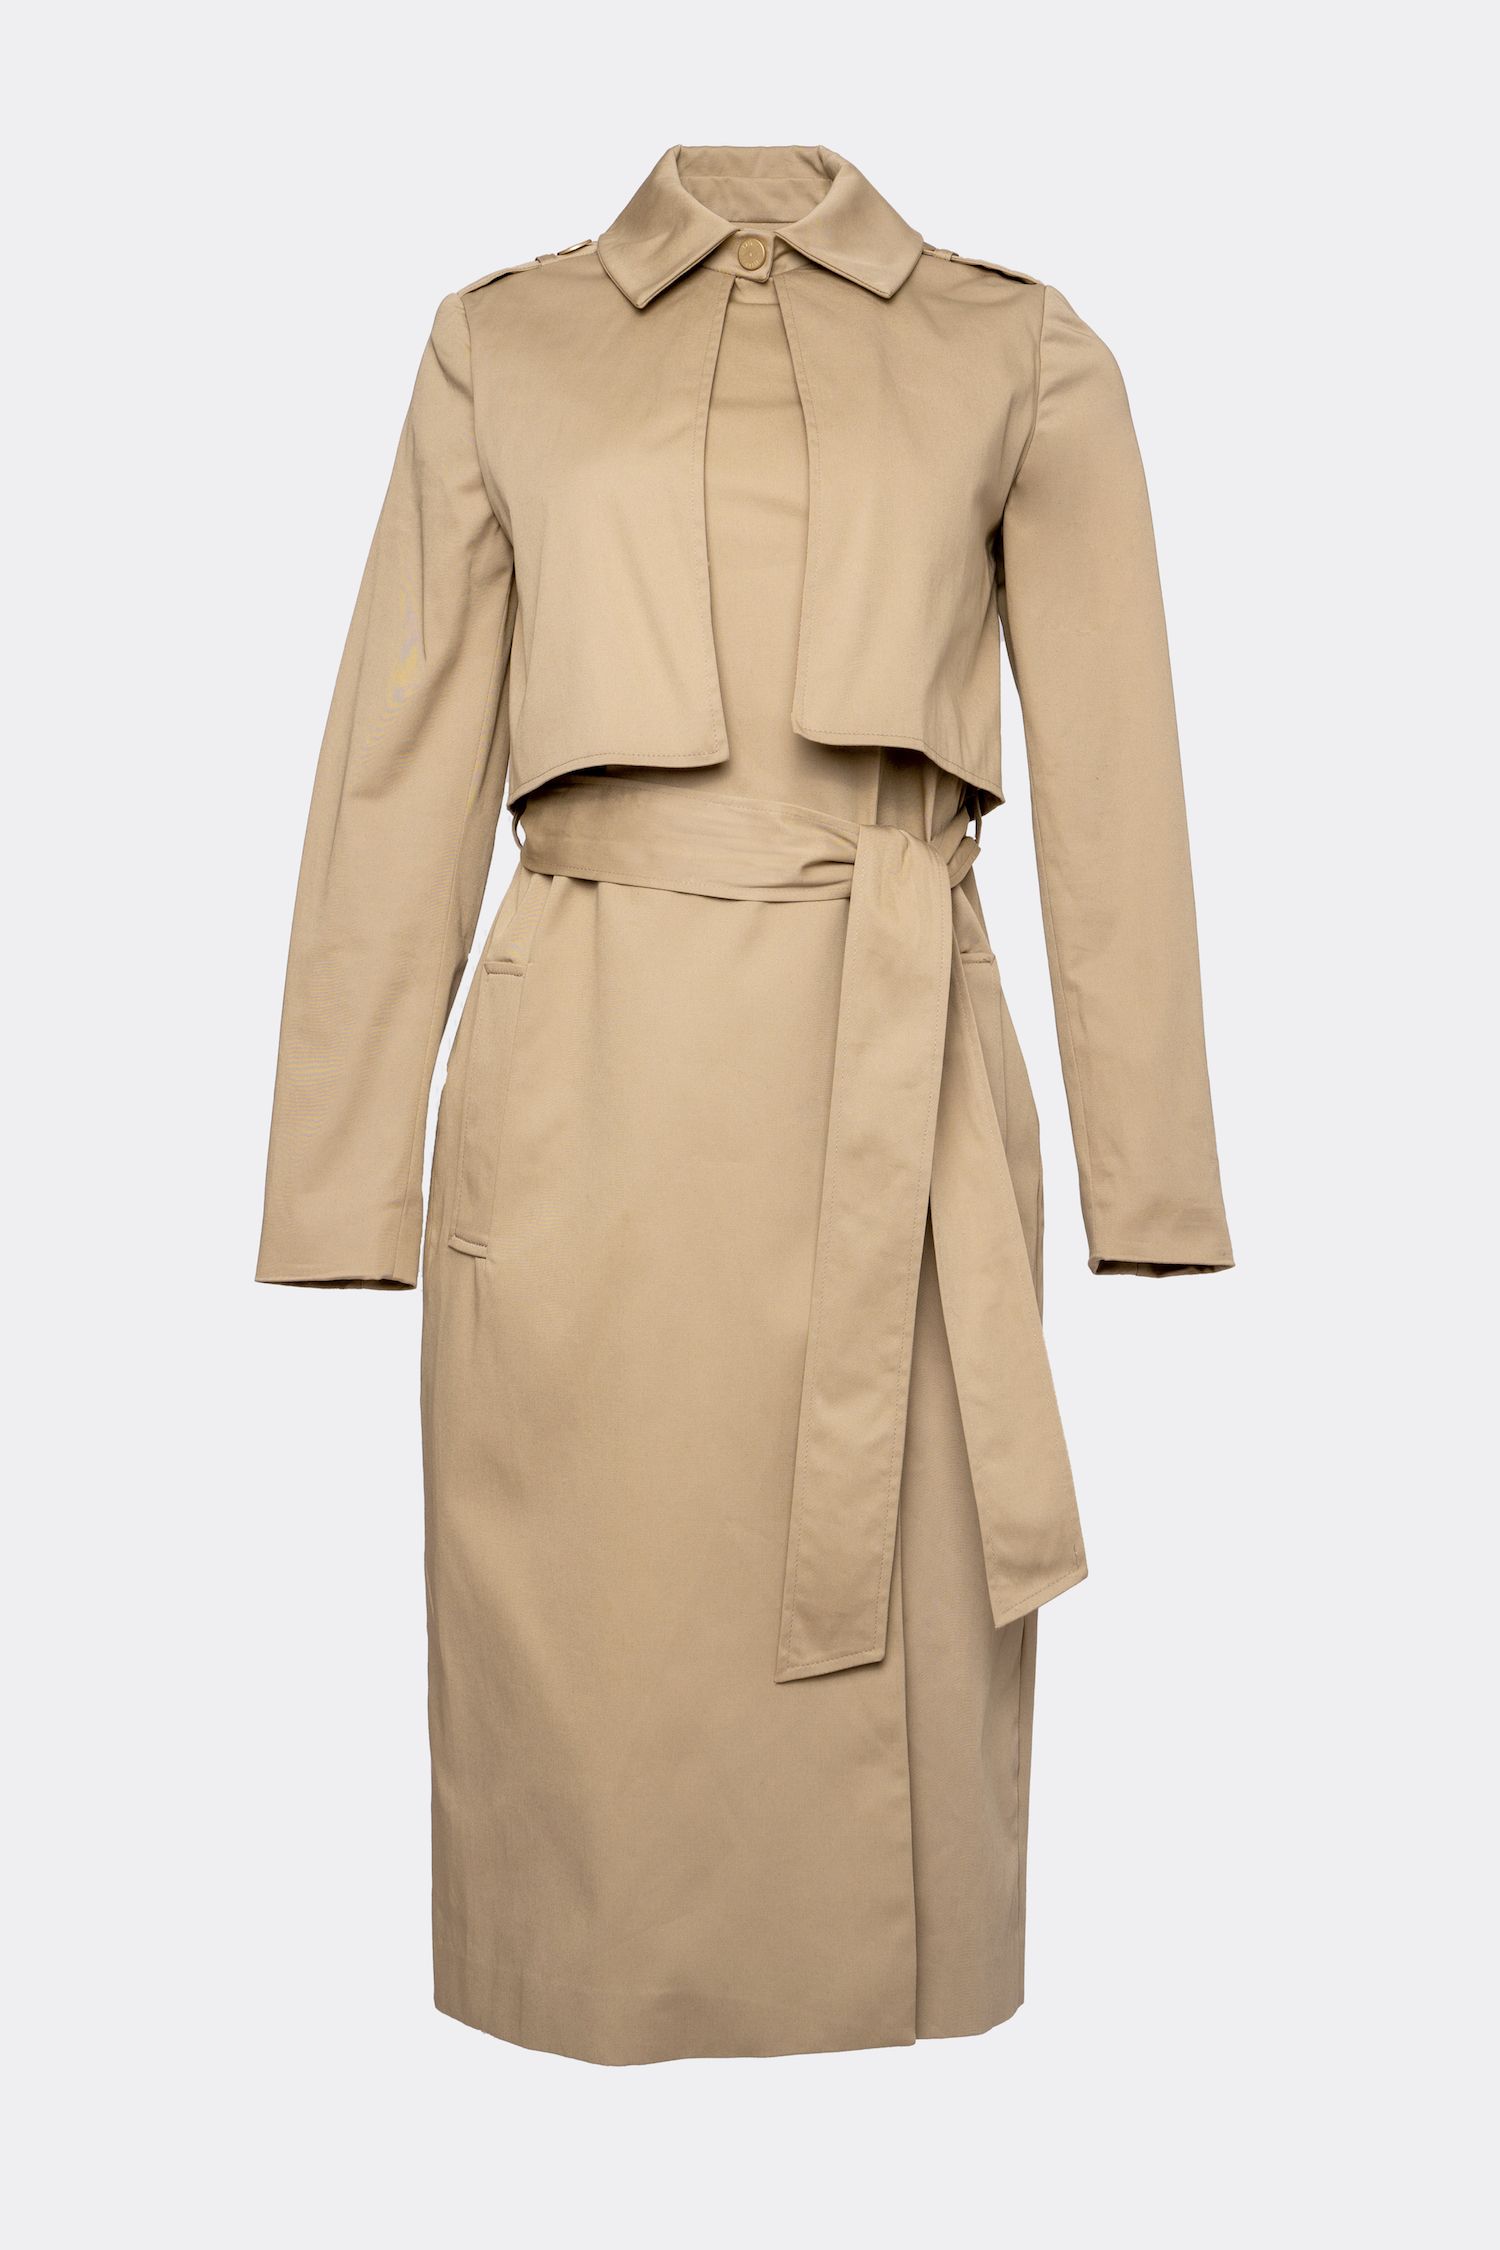 23 Classic Trench Coats You'll Wear Forever